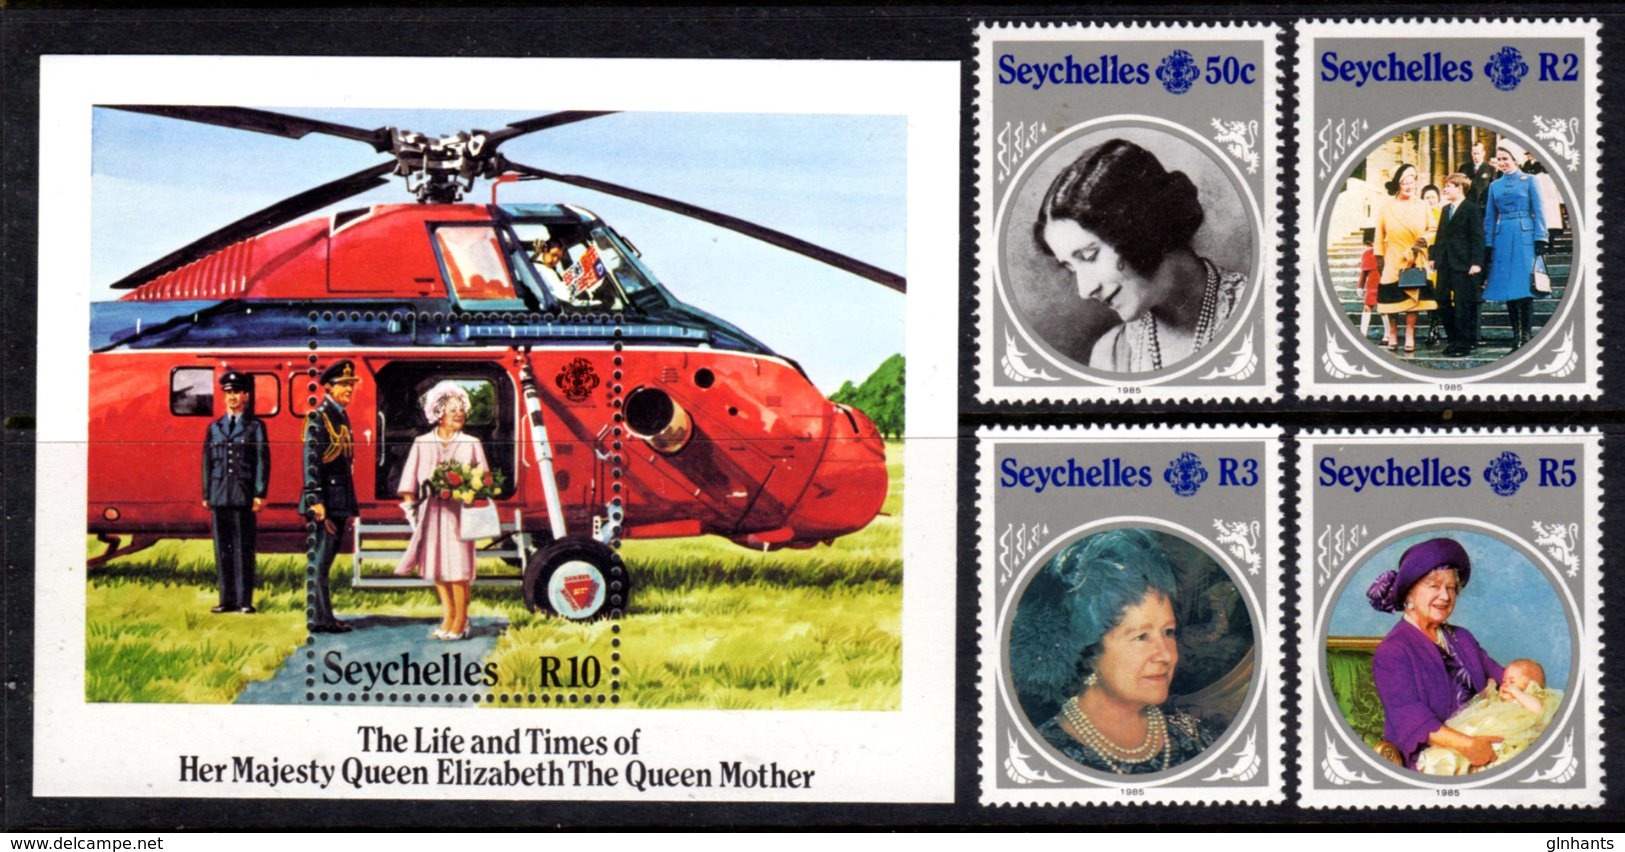 SEYCHELLES - 1985 LIFE & TIMES OF QUEEN ELIZABETH THE QUEEN MOTHER SET (4V) & MS FINE MNH ** SG 614-617, MS618 - Seychelles (1976-...)